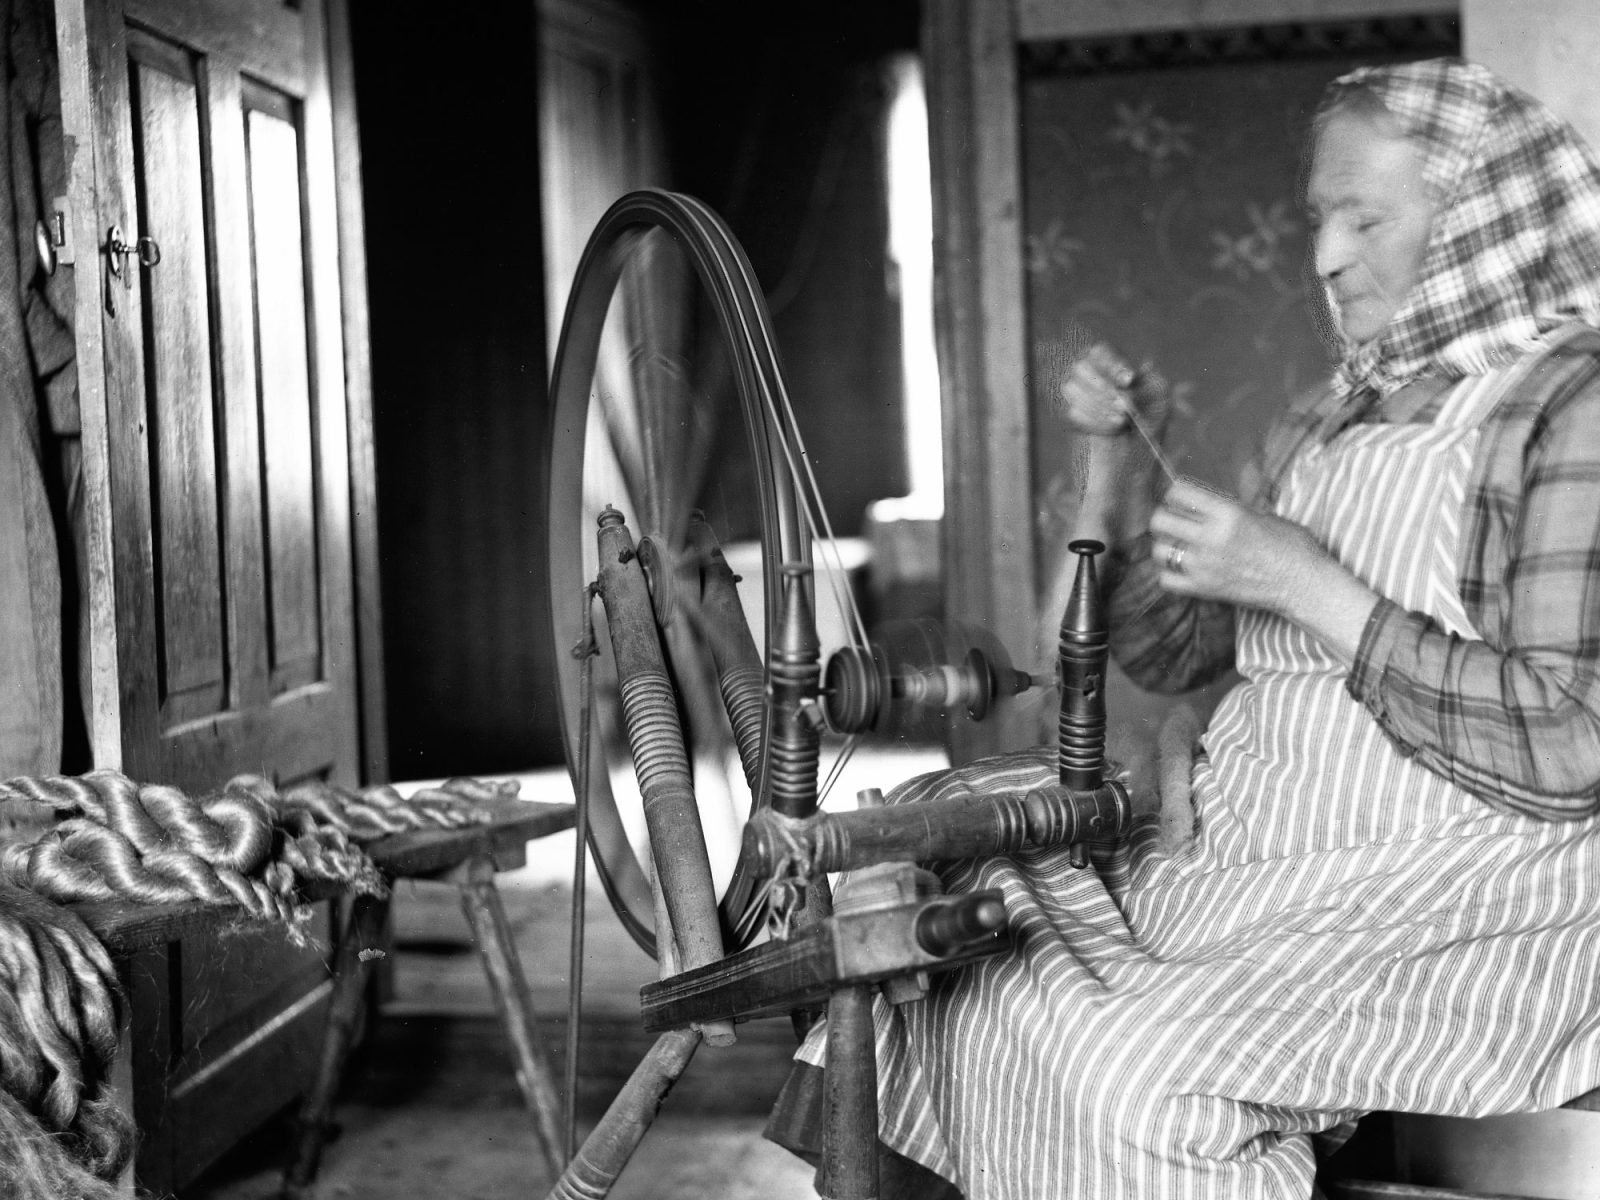 Blonde woman in shawl and striped apron spinning flax on a spinning wheel, 1920s.